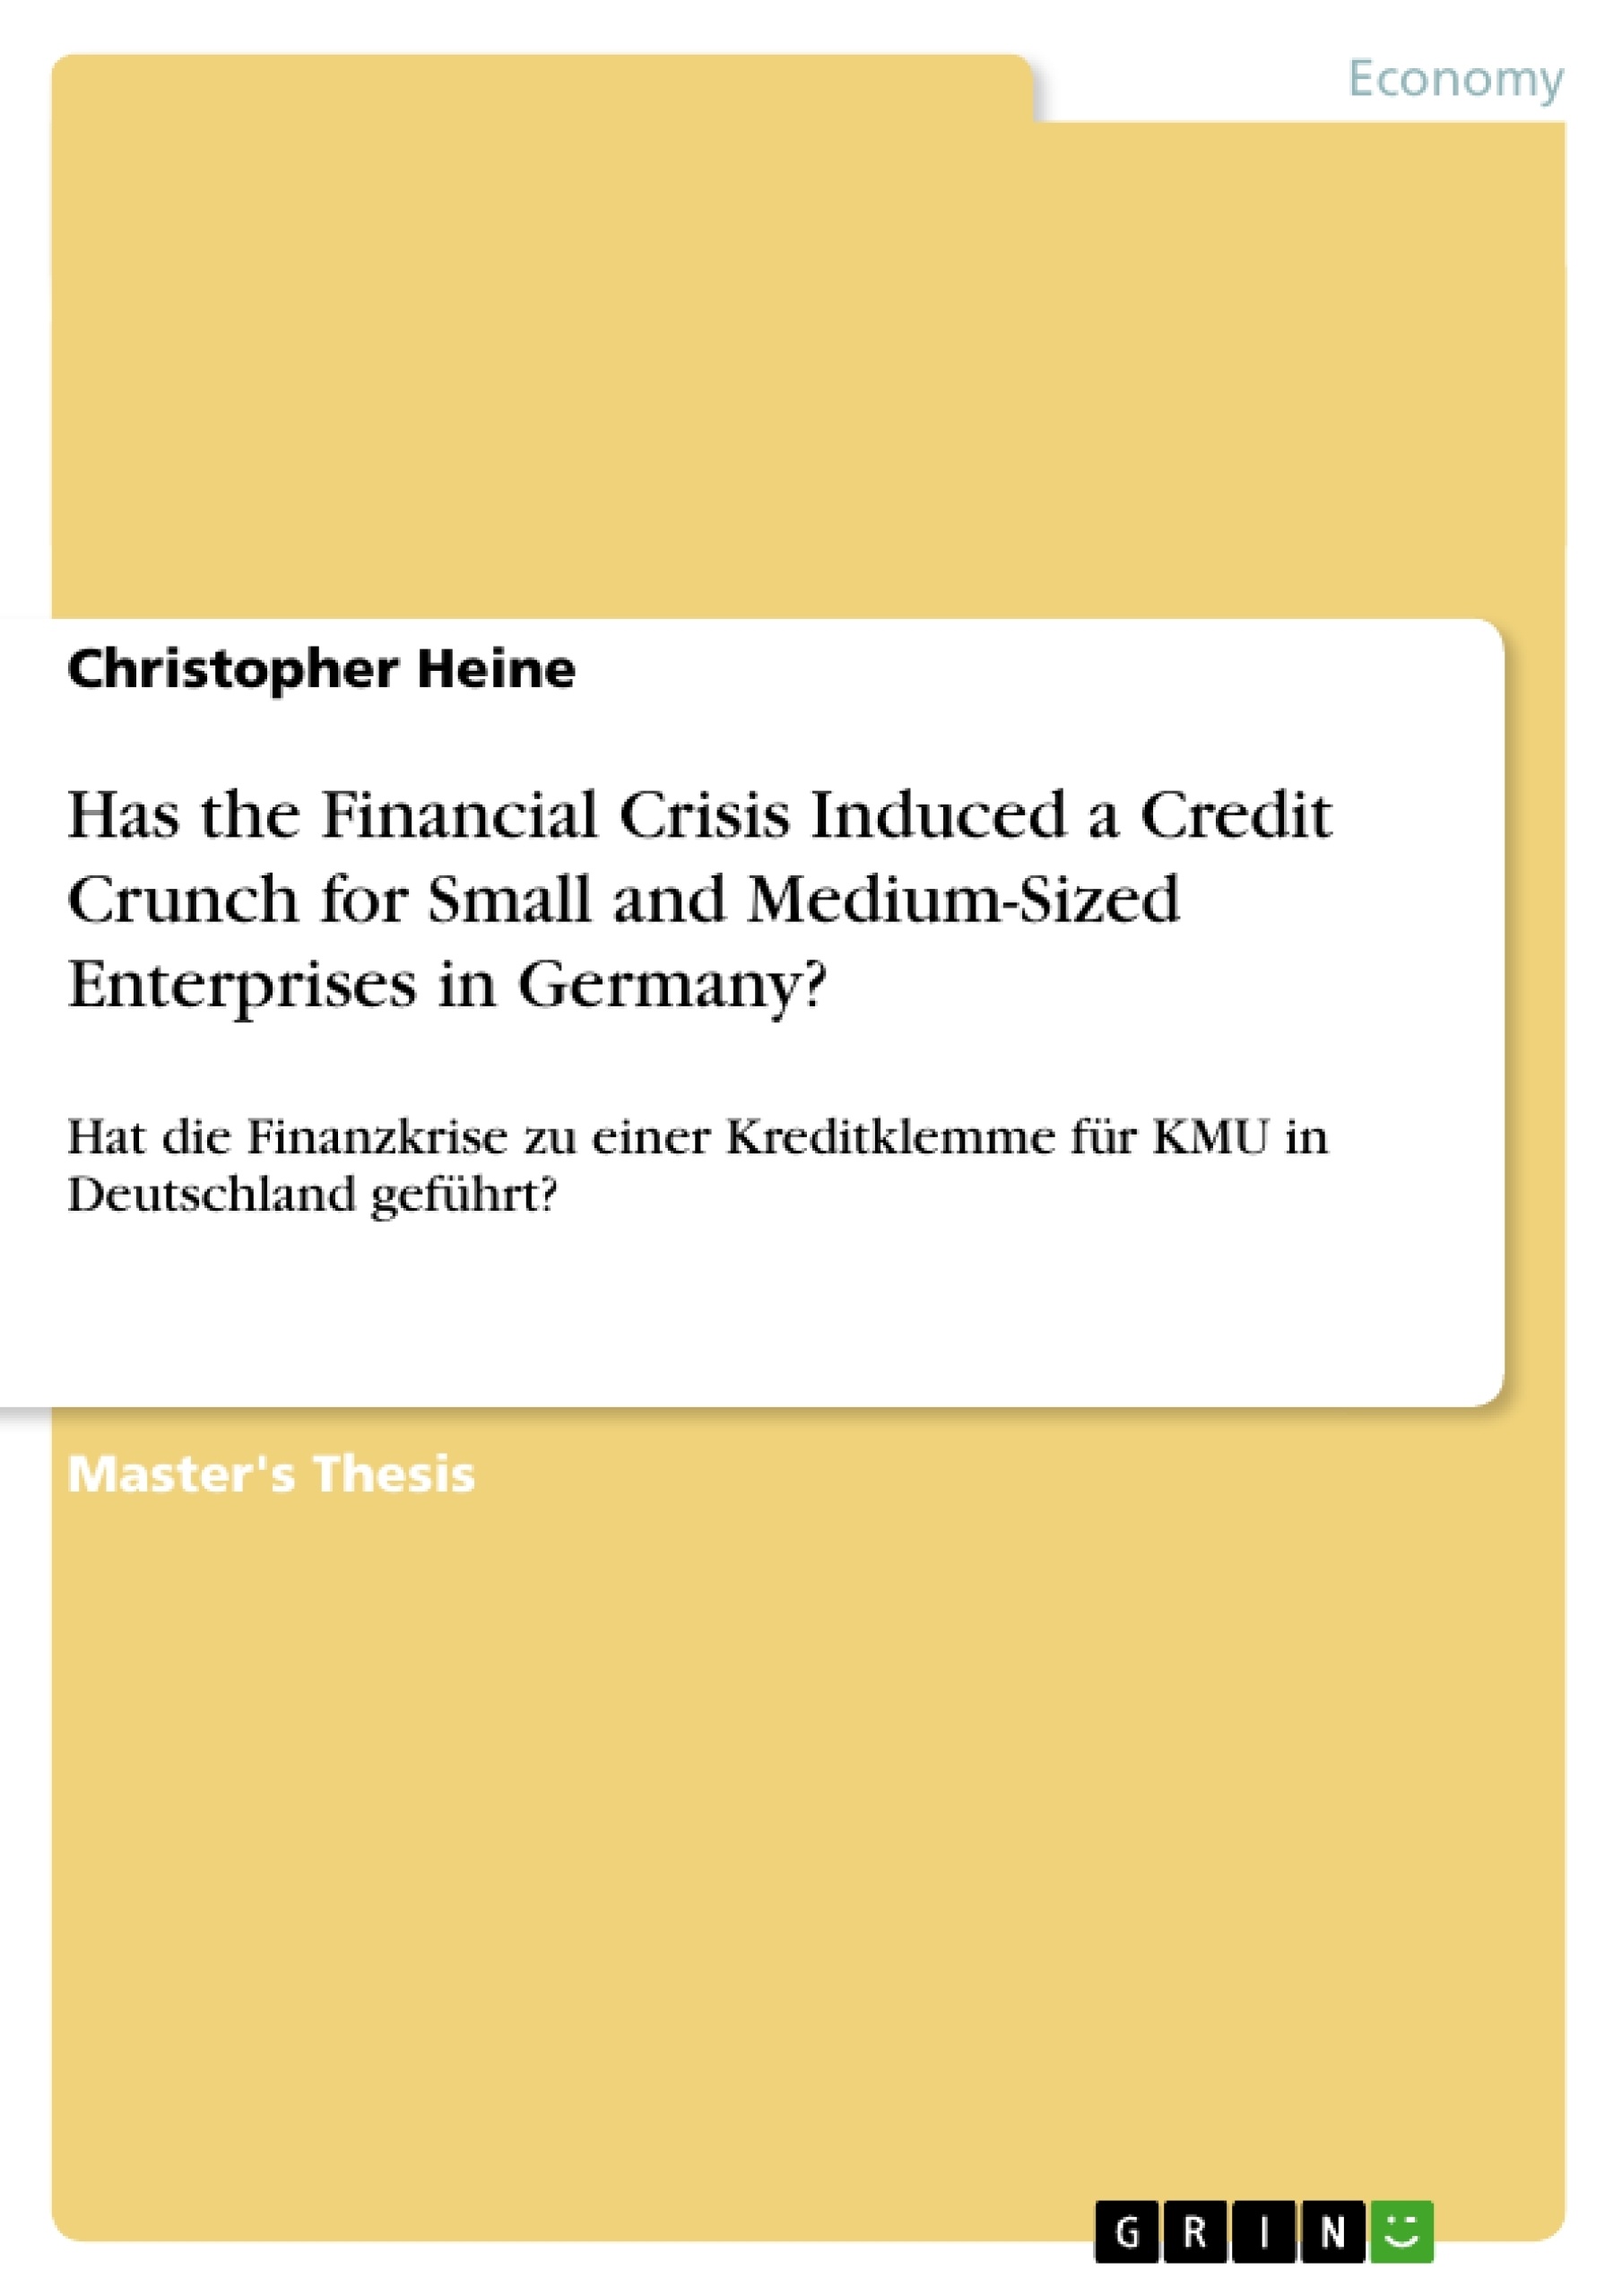 Titre: Has the Financial Crisis Induced a Credit Crunch for Small and Medium-Sized Enterprises in Germany?